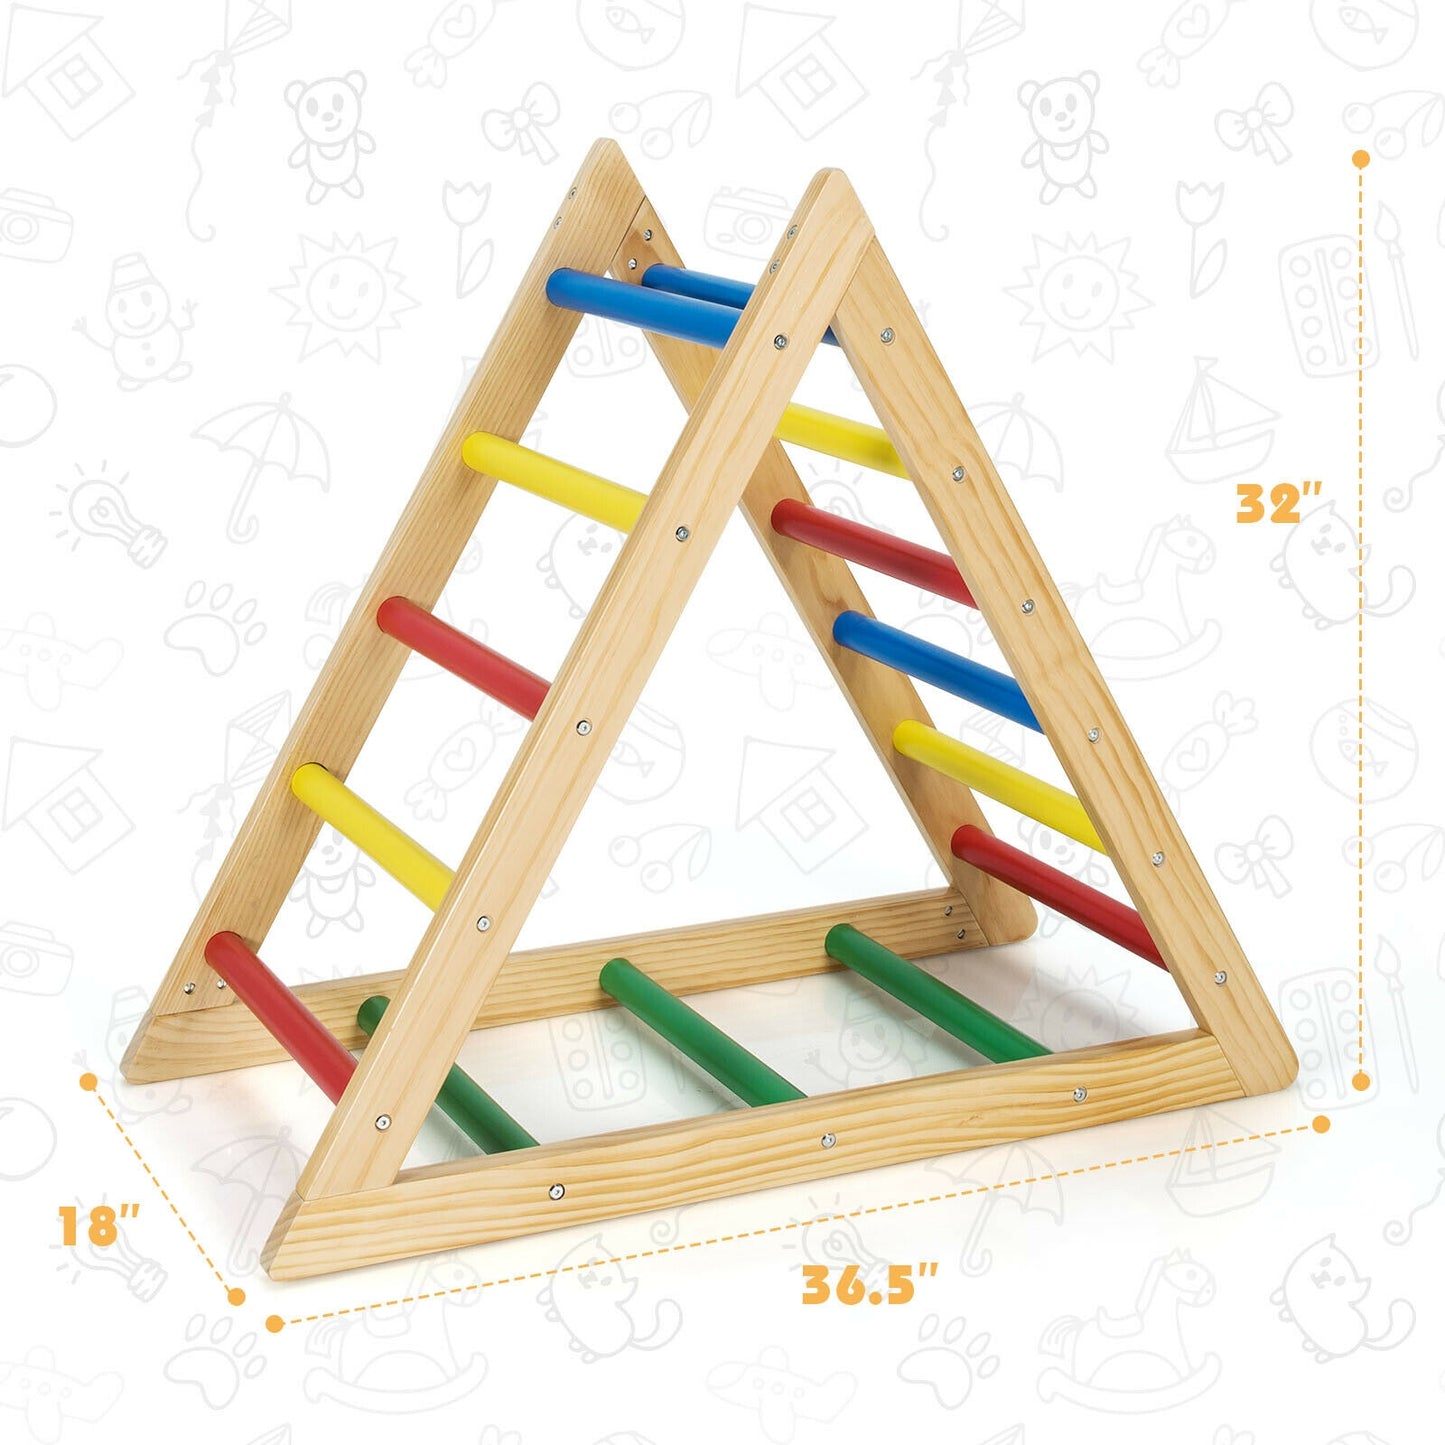 Climbing Triangle Ladder with 3 Levels for Kids-Multicolor